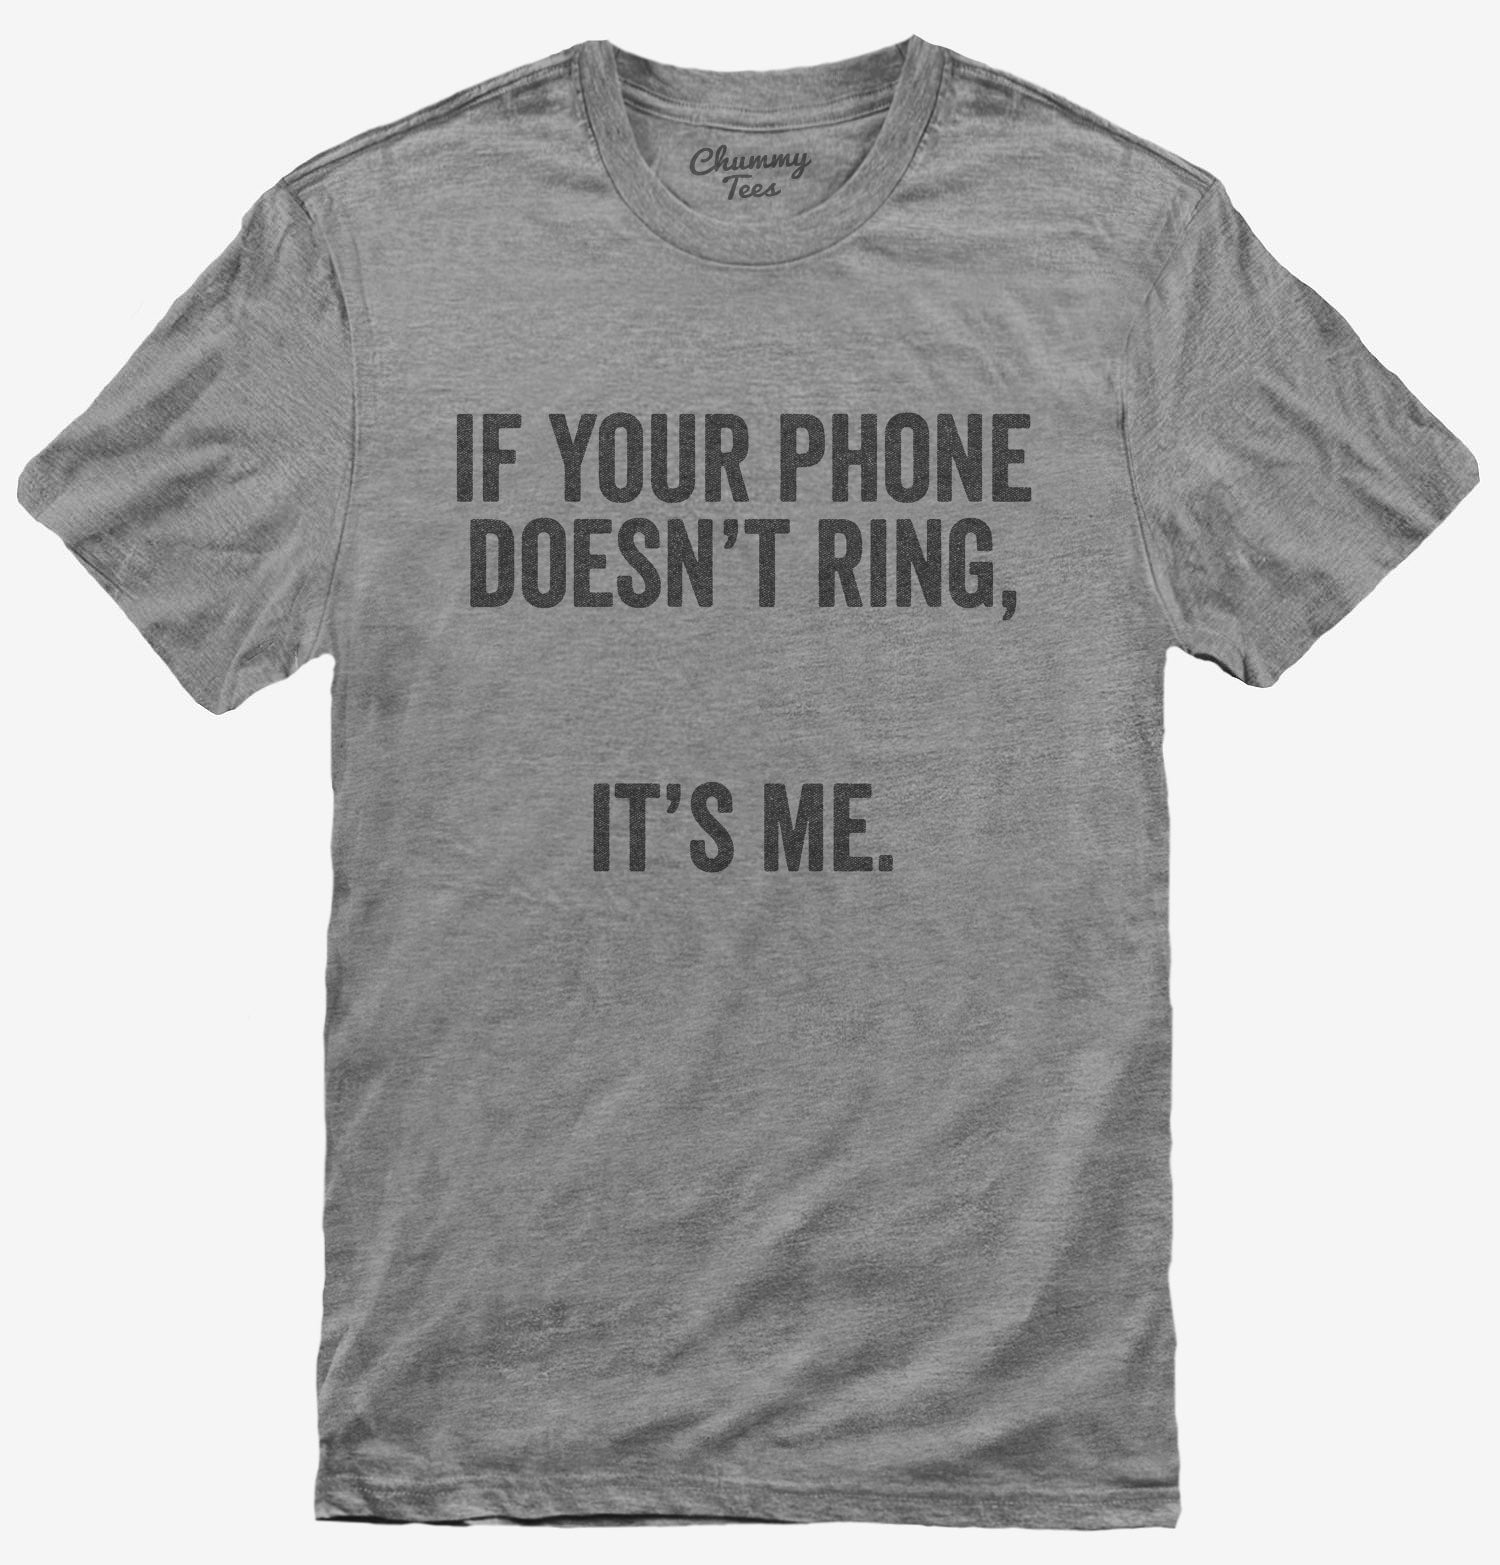 If Your Phone Doesn't Ring, It's Me' Men's T-Shirt | Spreadshirt